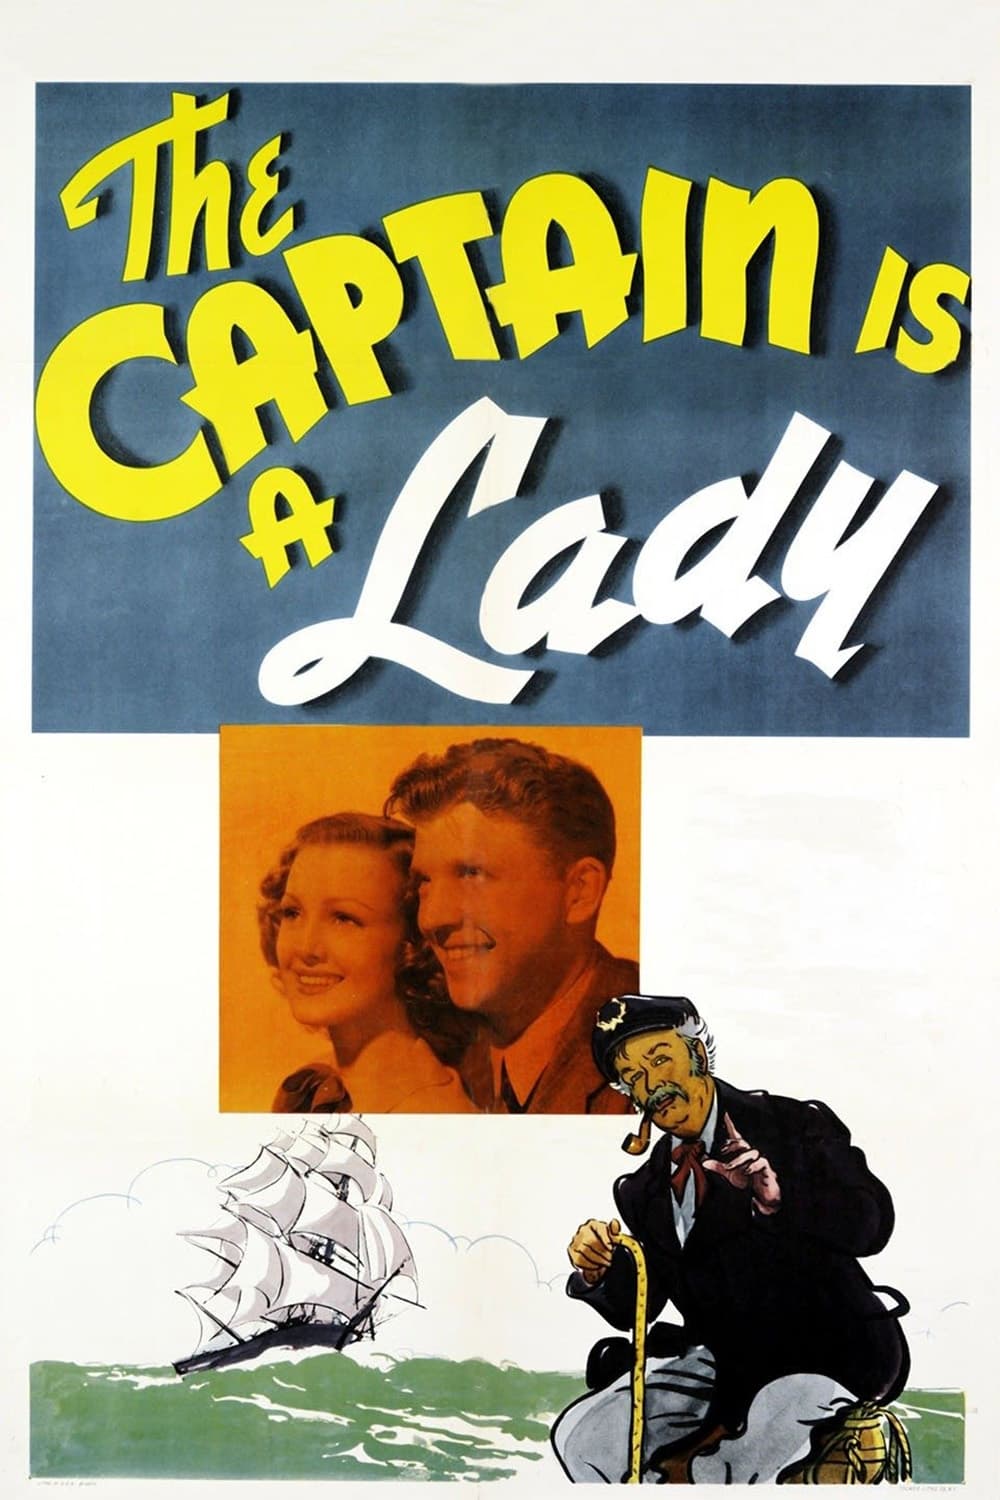 The Captain Is a Lady